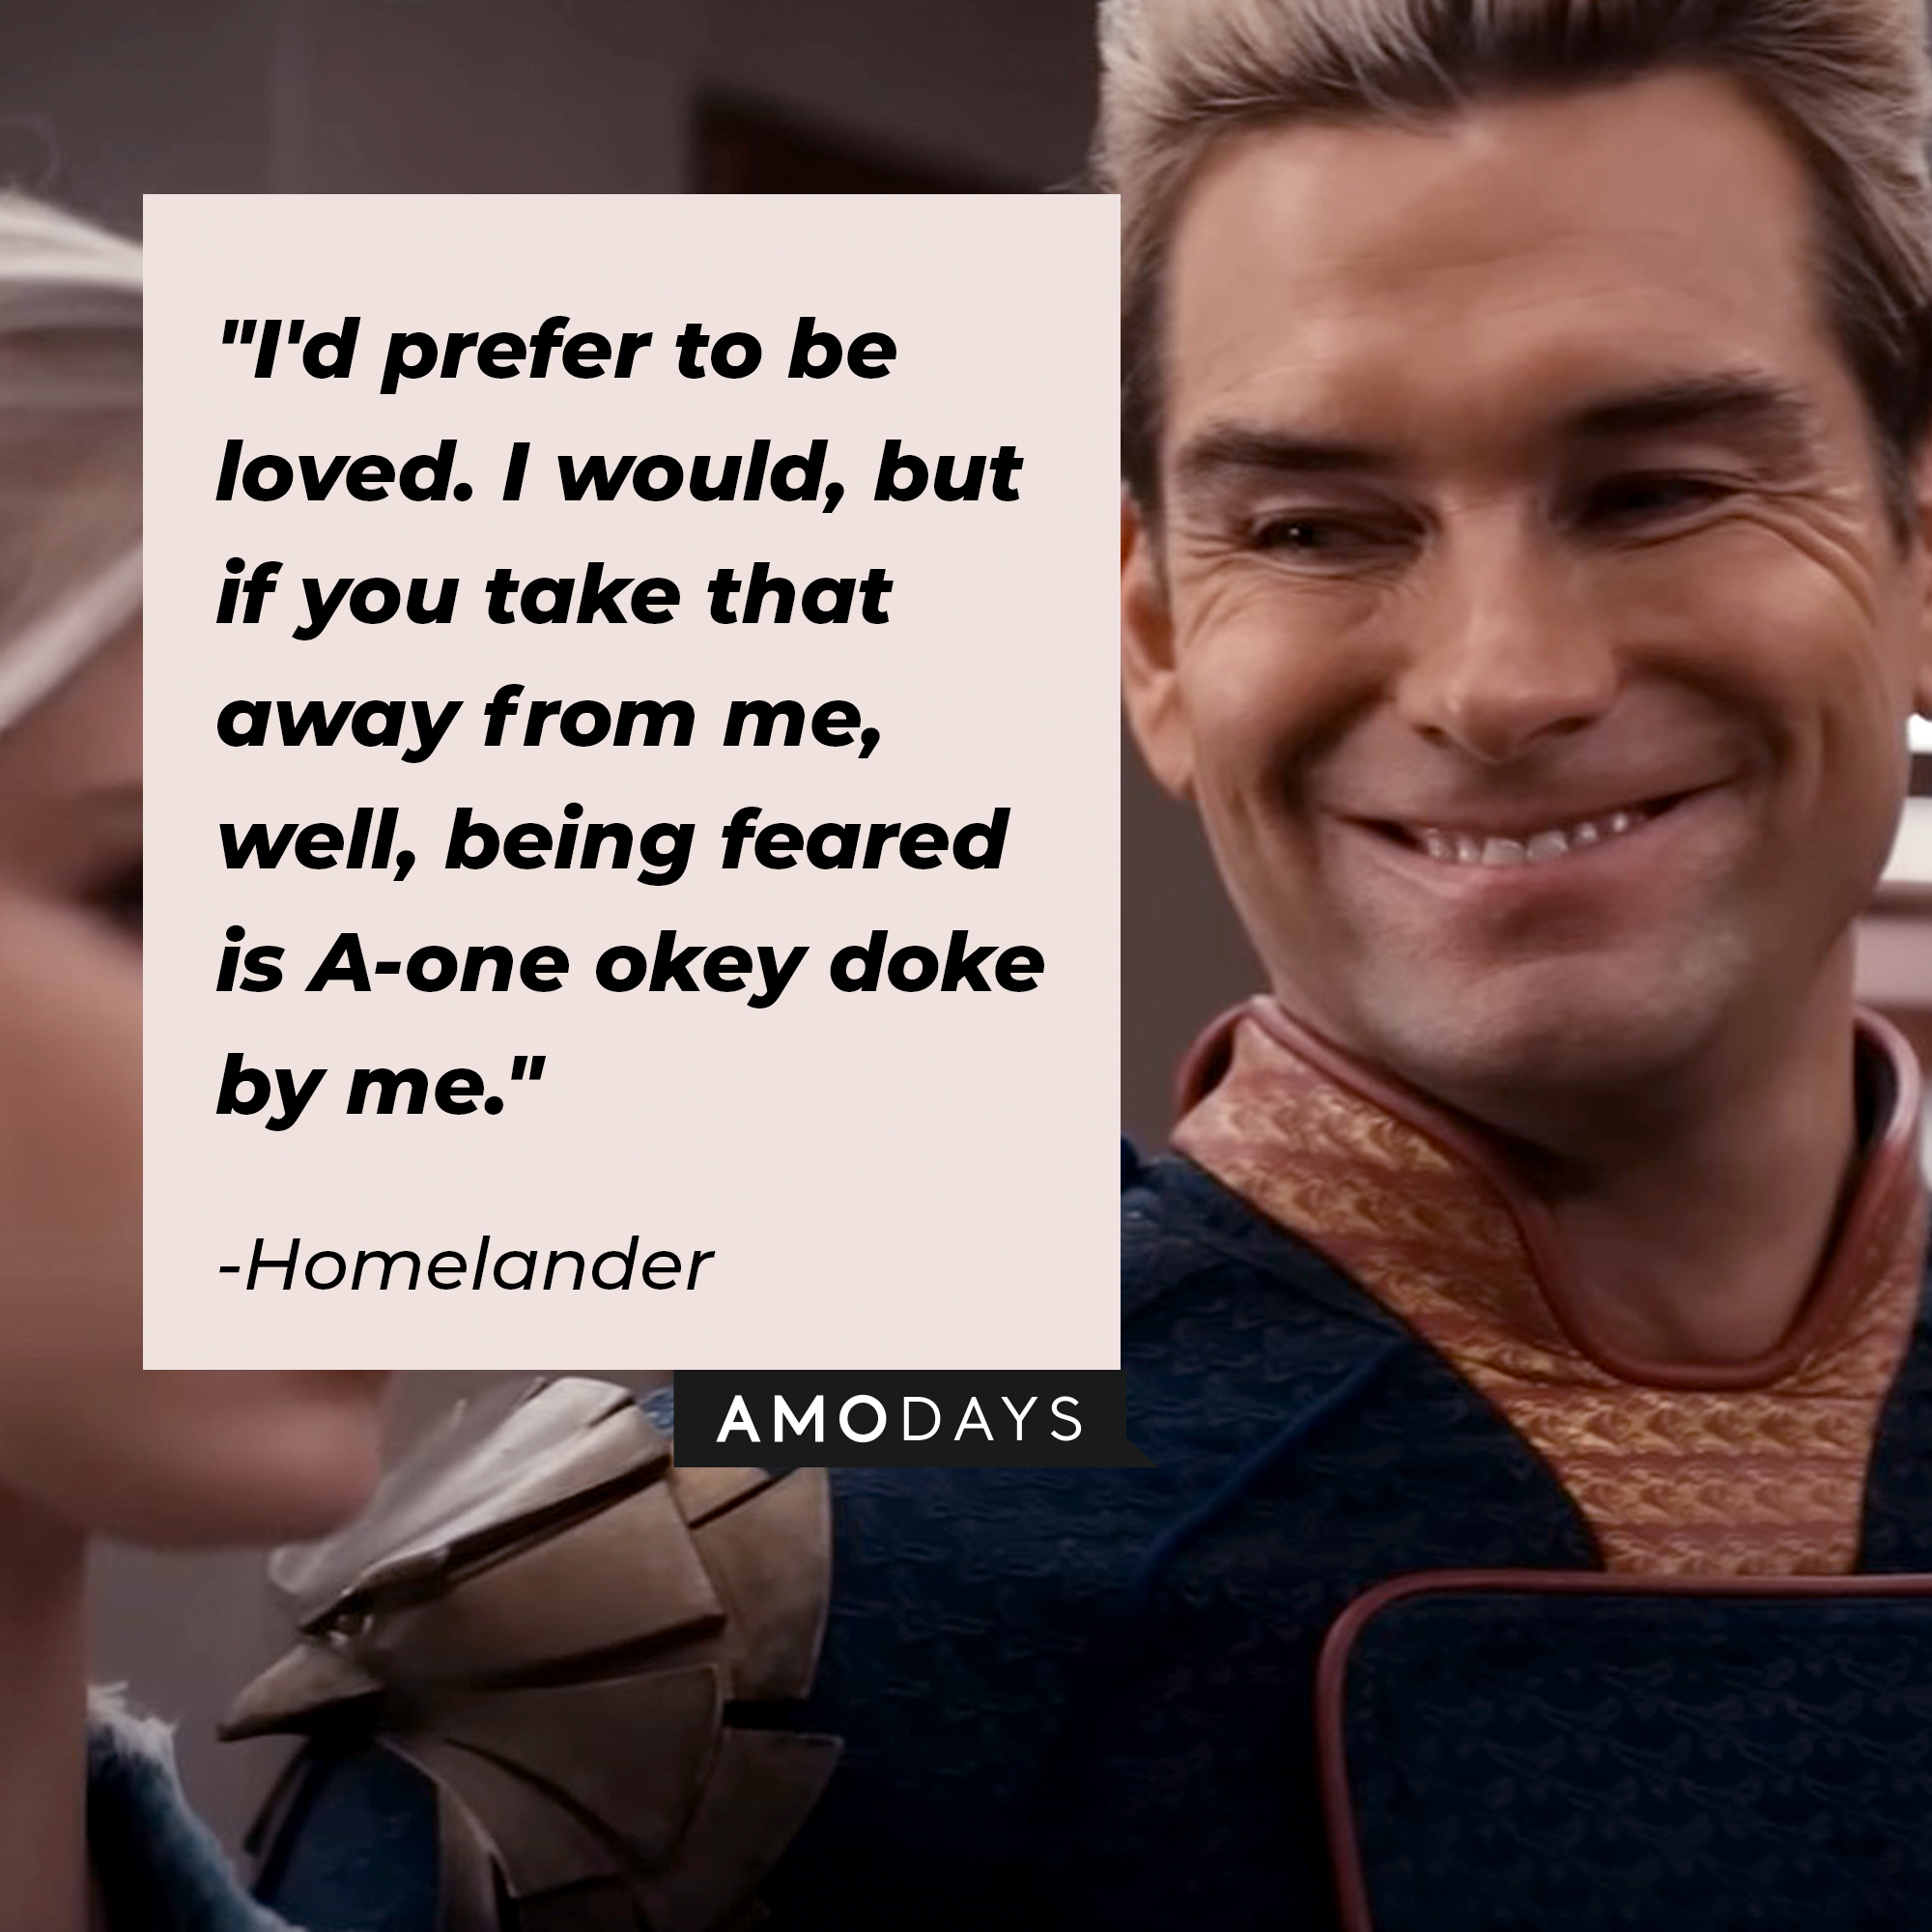 Homelander's quote: "I'd prefer to be loved. I would, but if you take that away from me, well, being feared is A-one okey doke by me." | Source: Facebook.com/TheBoysTV